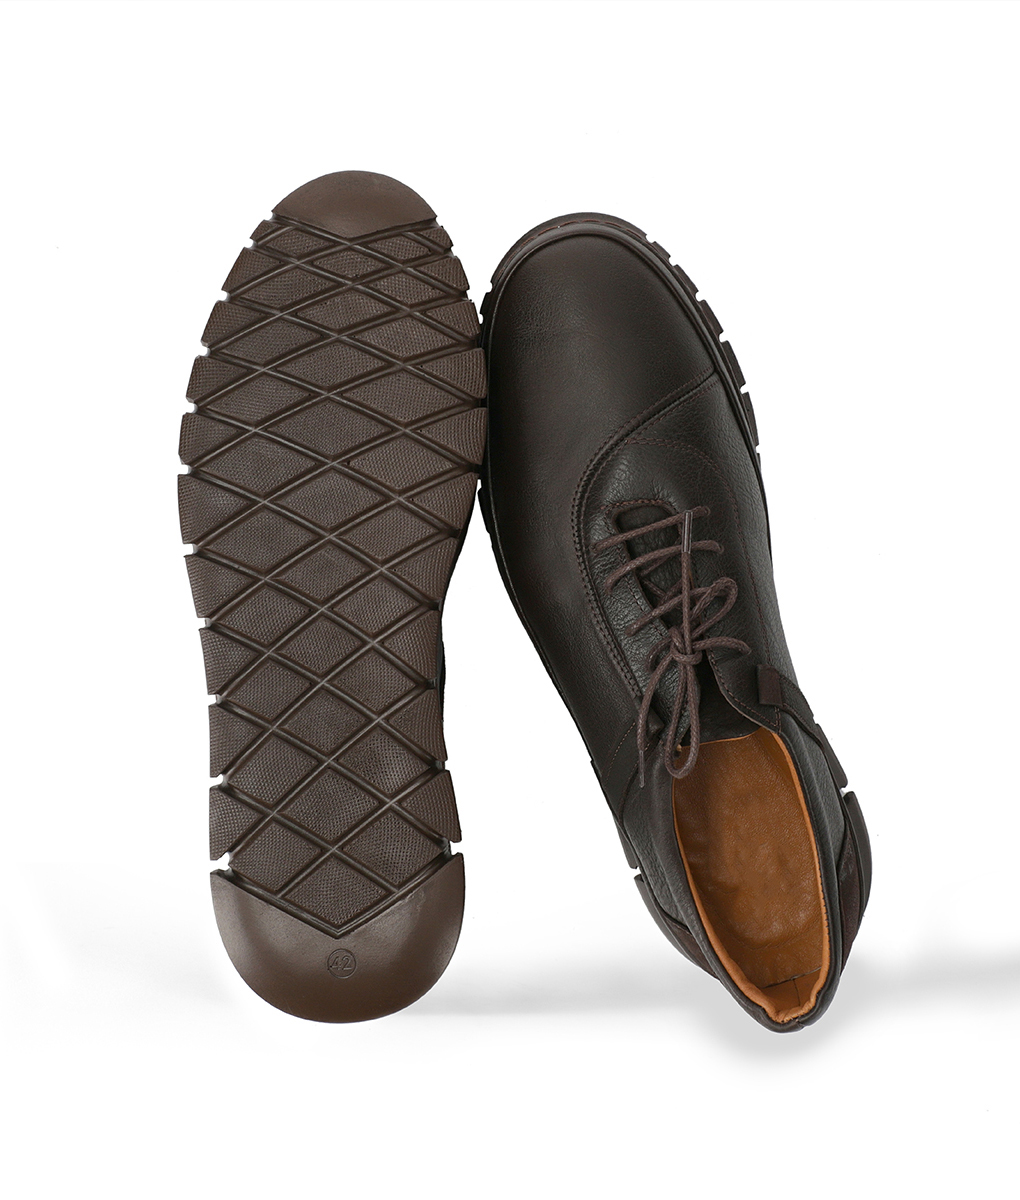 Grainy Design Dark Brown Leather Shoes for Men